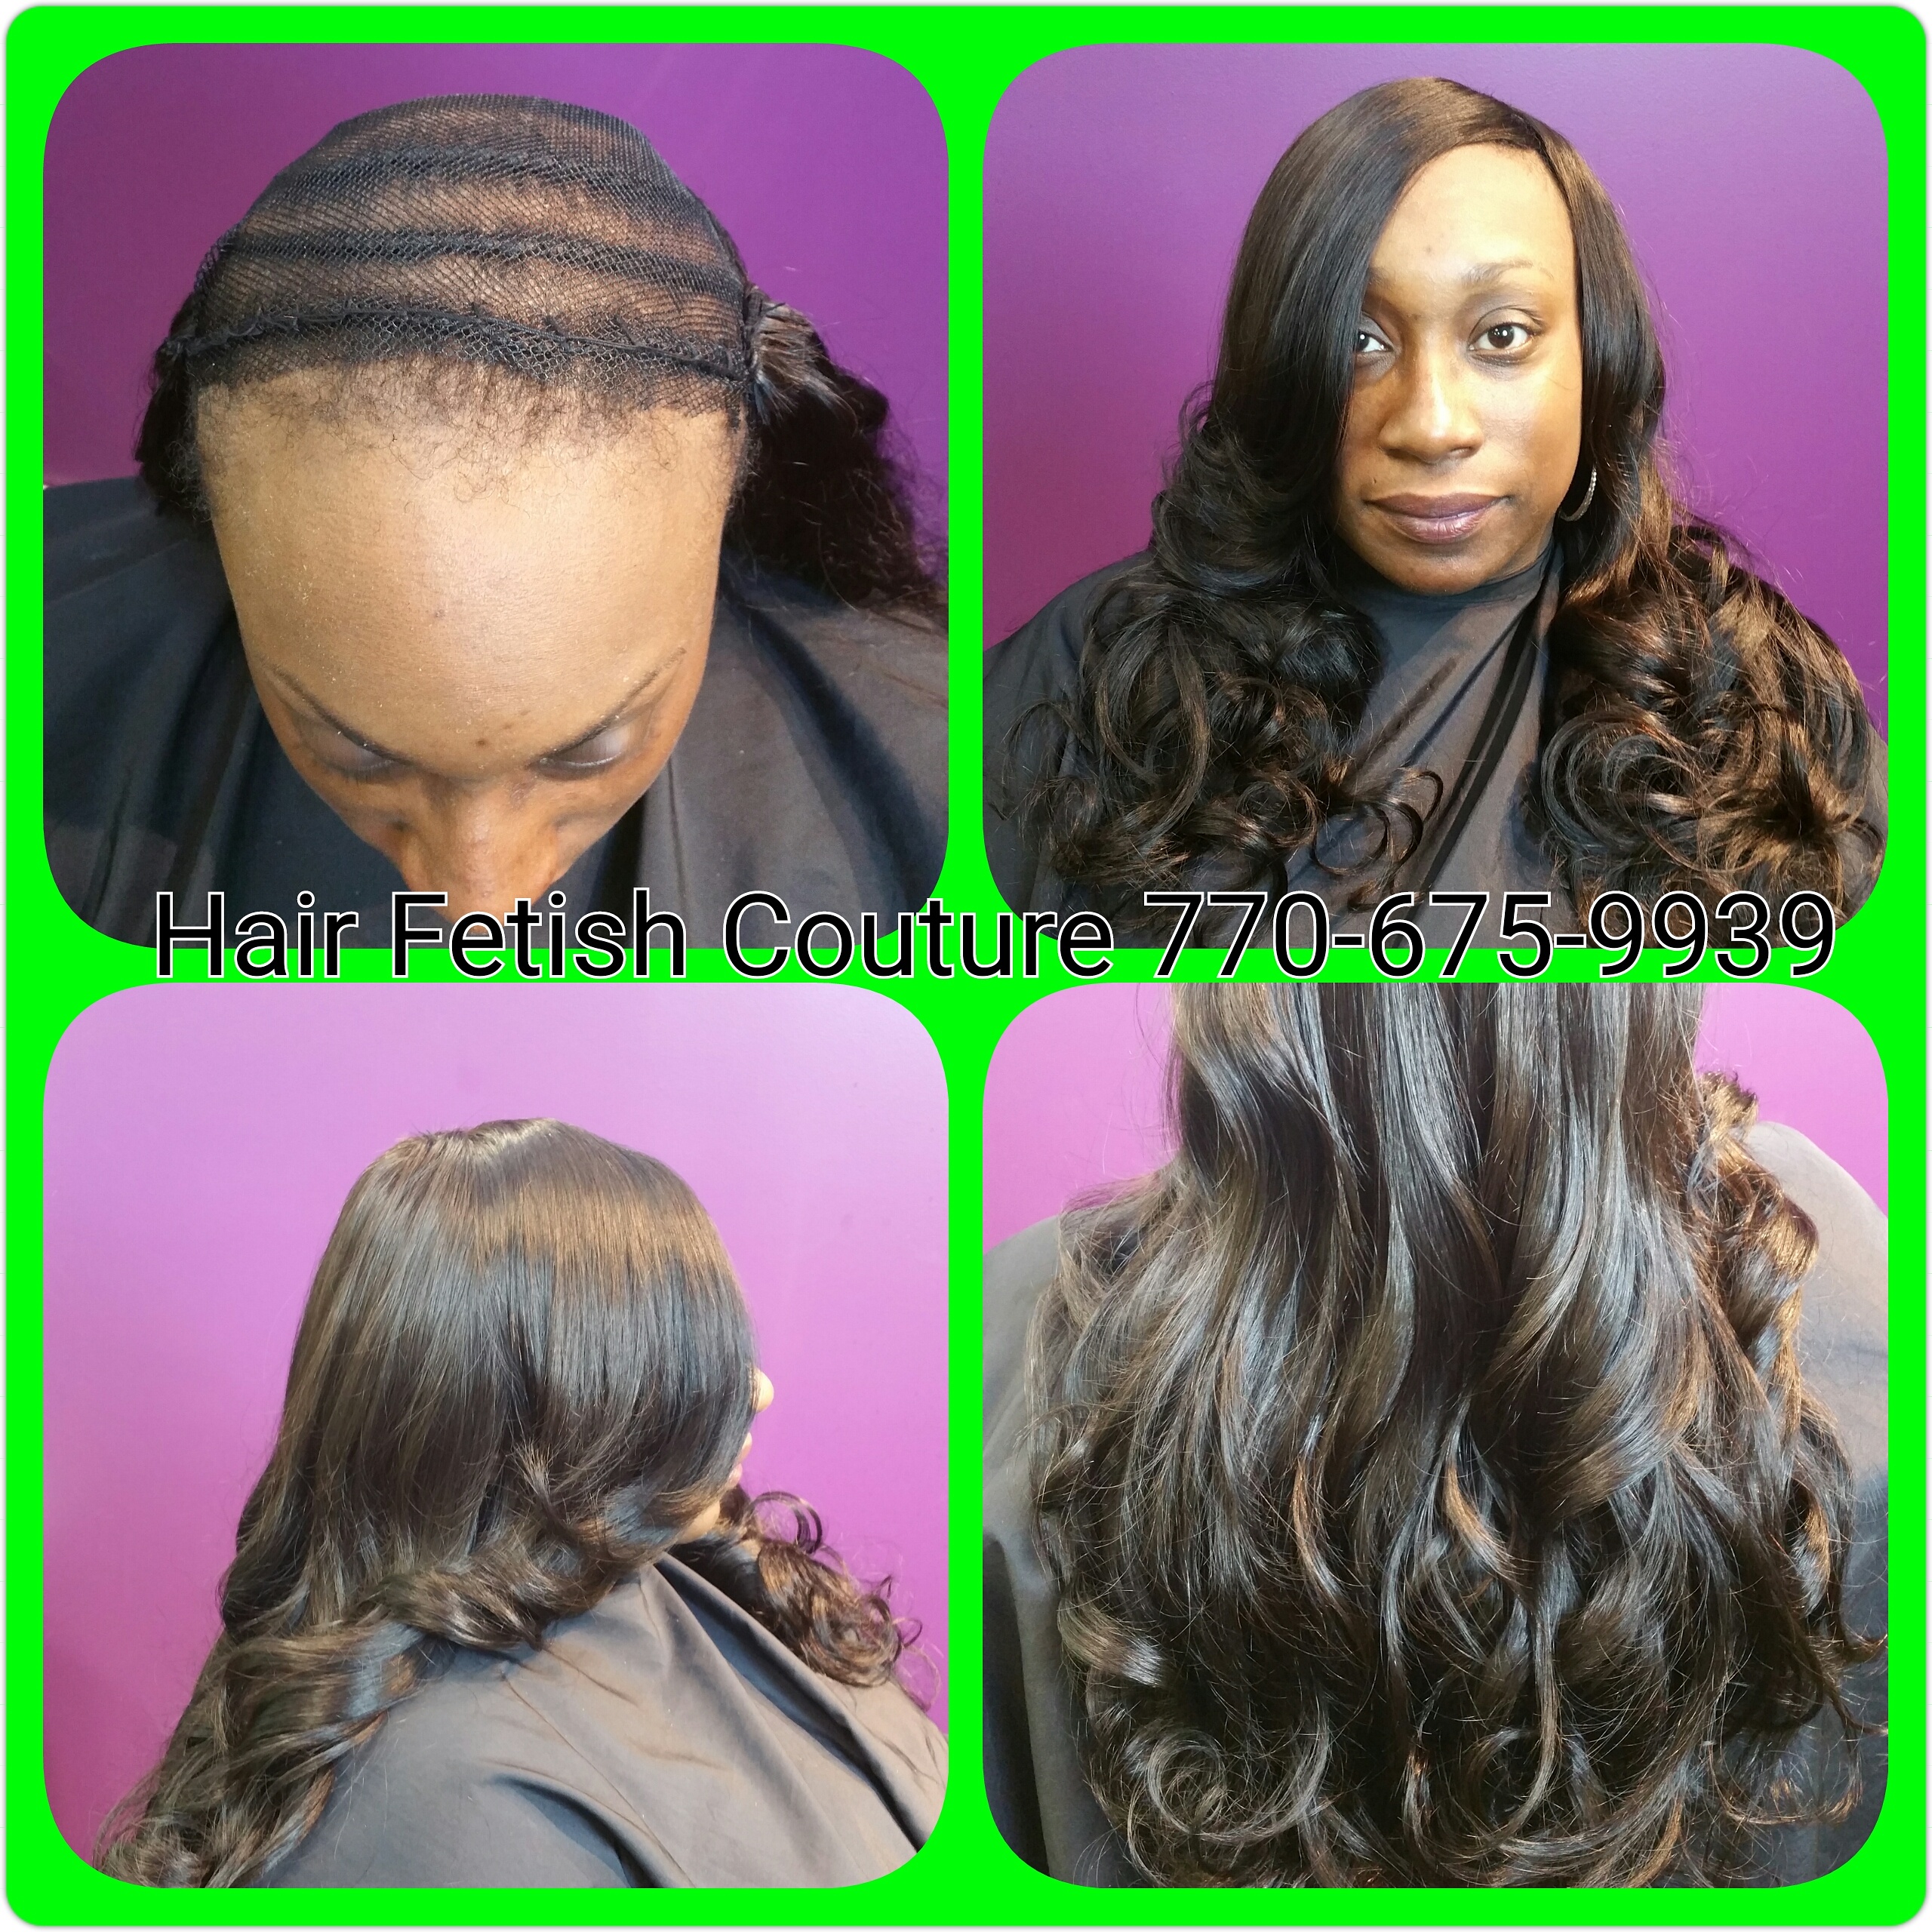 full head sew in weave styles - all about style